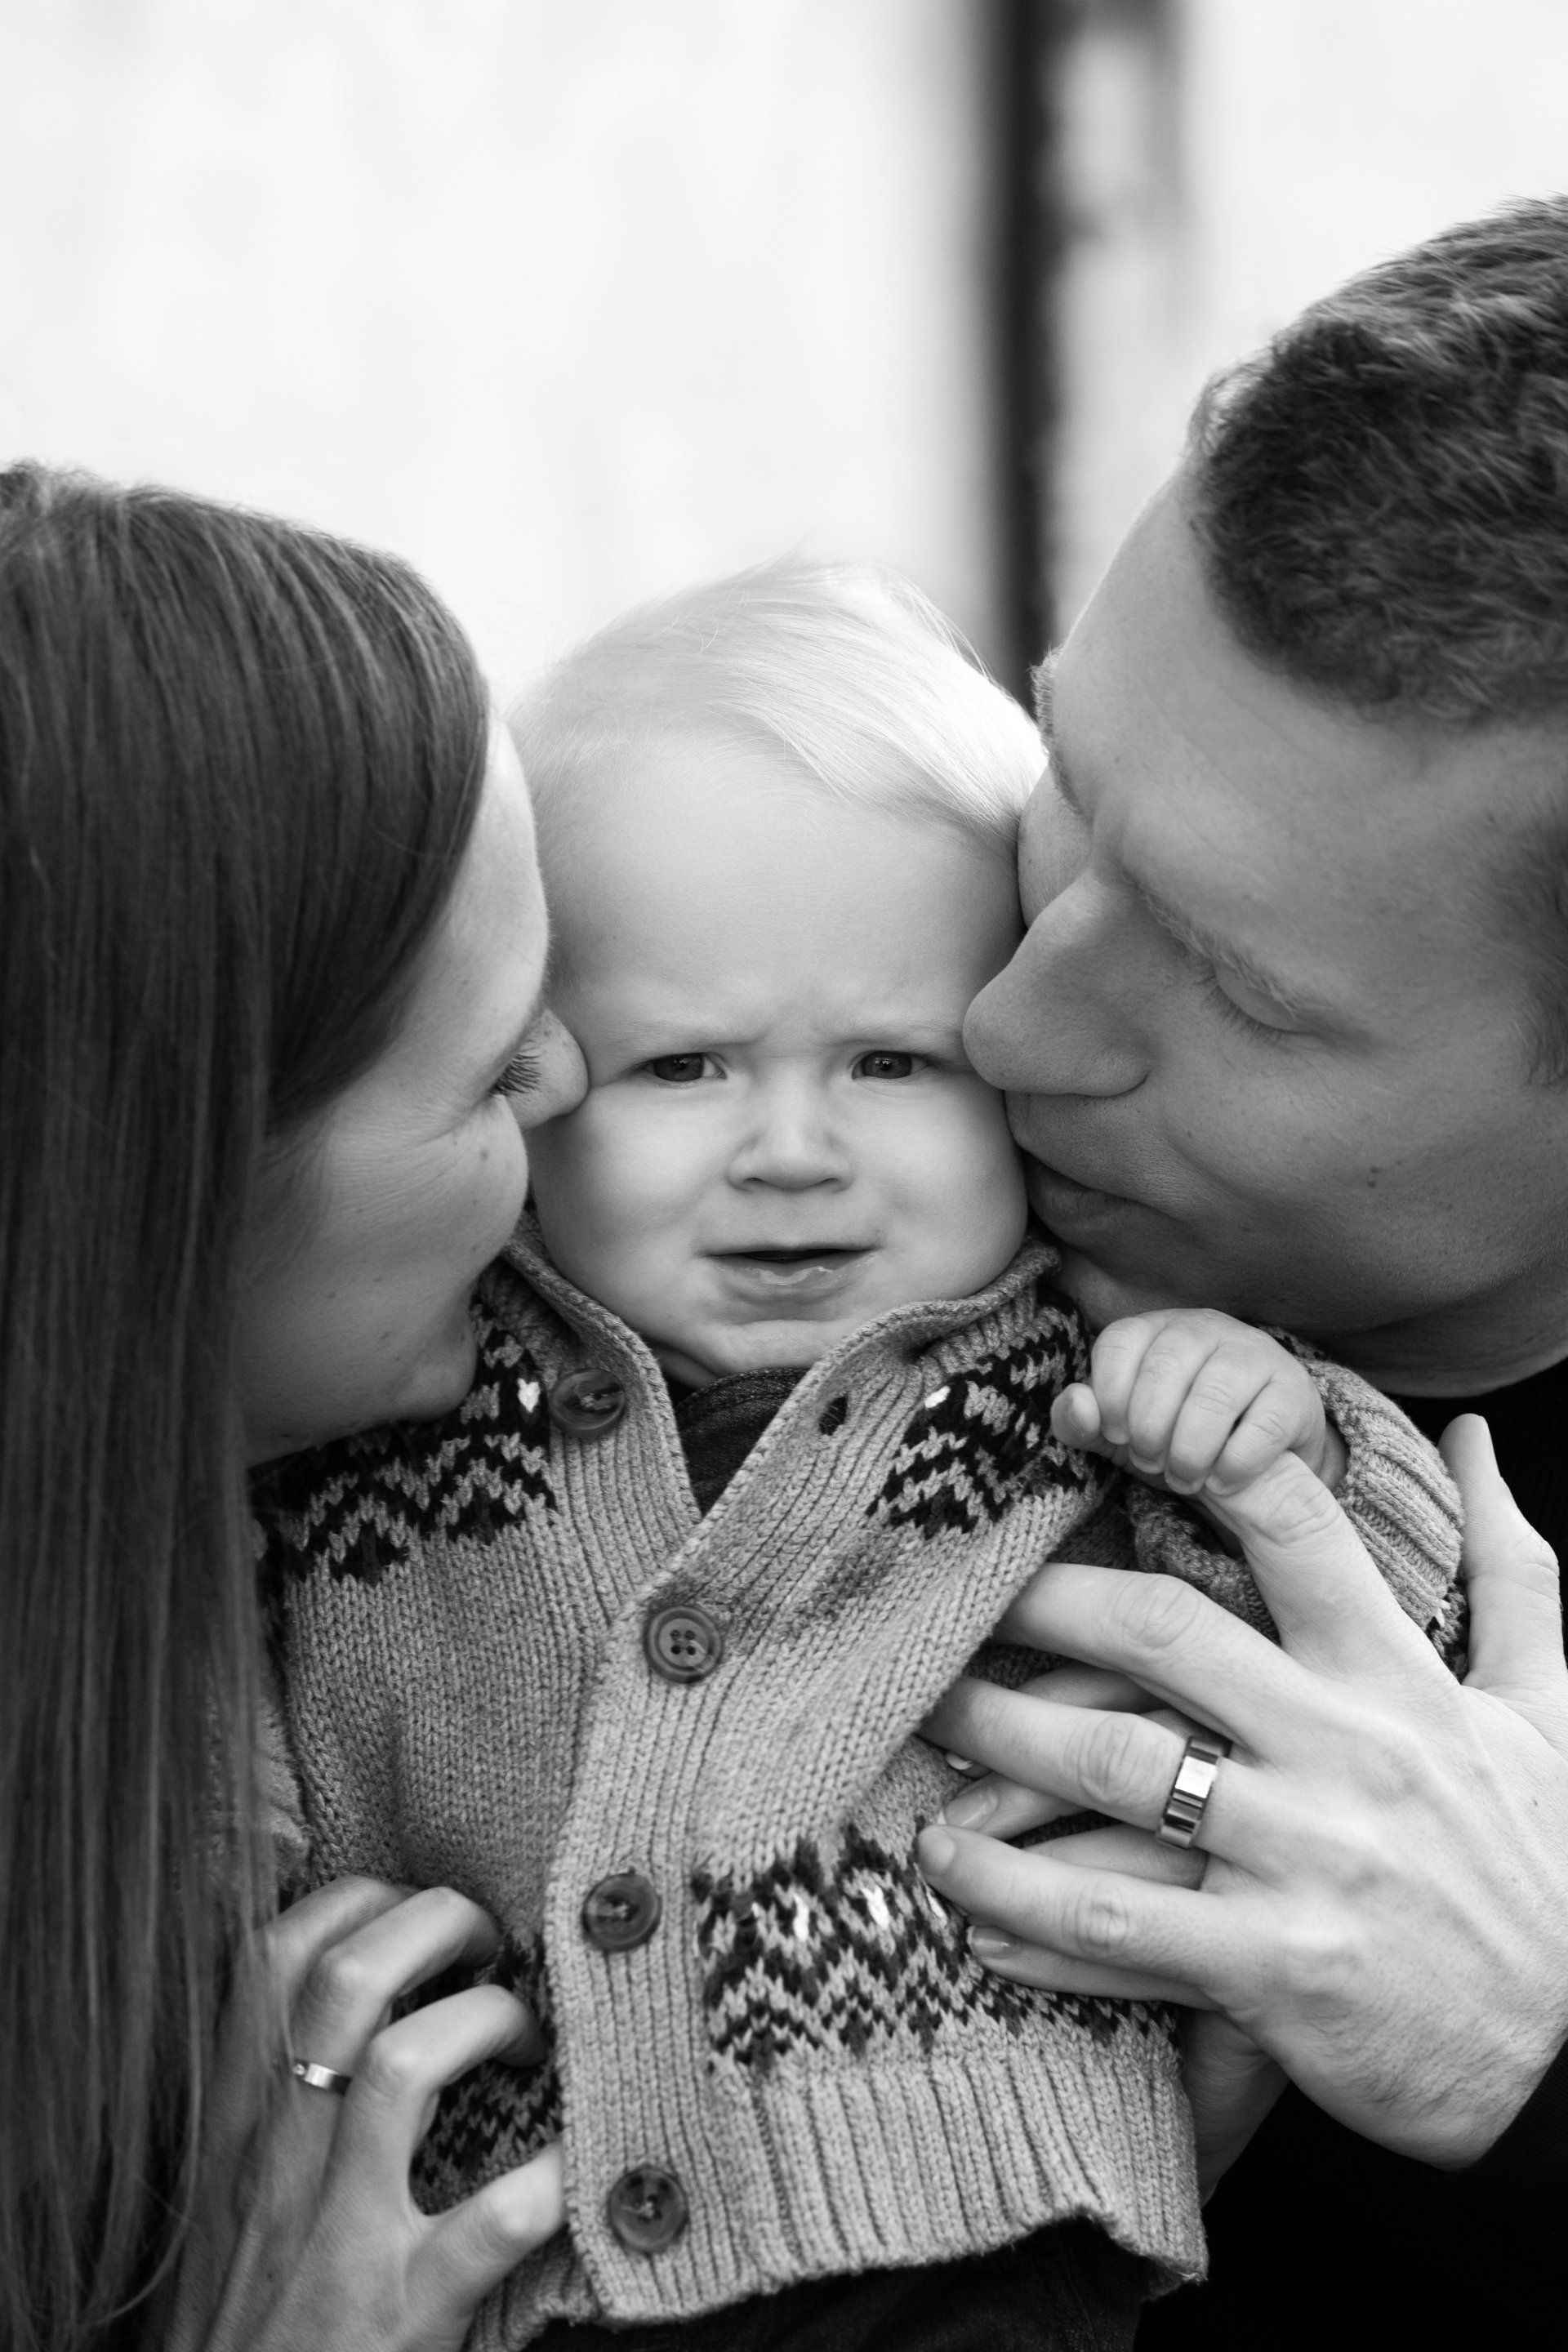 Natalie-DAngelo-Photography-Vancouver-BC-Canada-BlackWhite-Family-Portraits-Visual-Storyteller-mother-father-kissing-baby